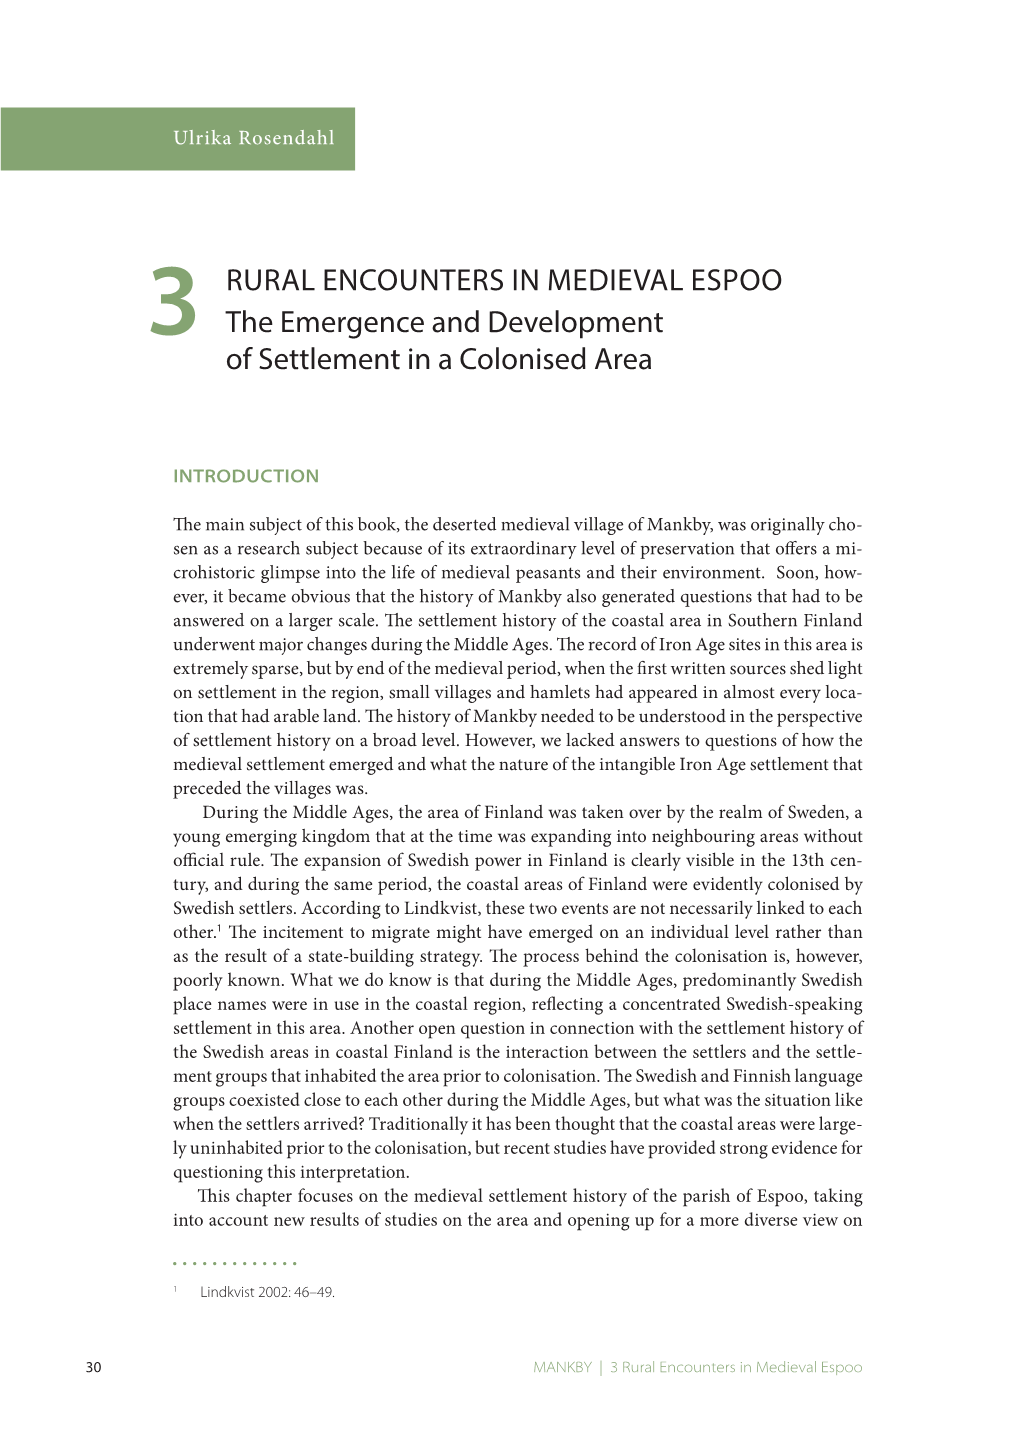 RURAL ENCOUNTERS in MEDIEVAL ESPOO the Emergence And